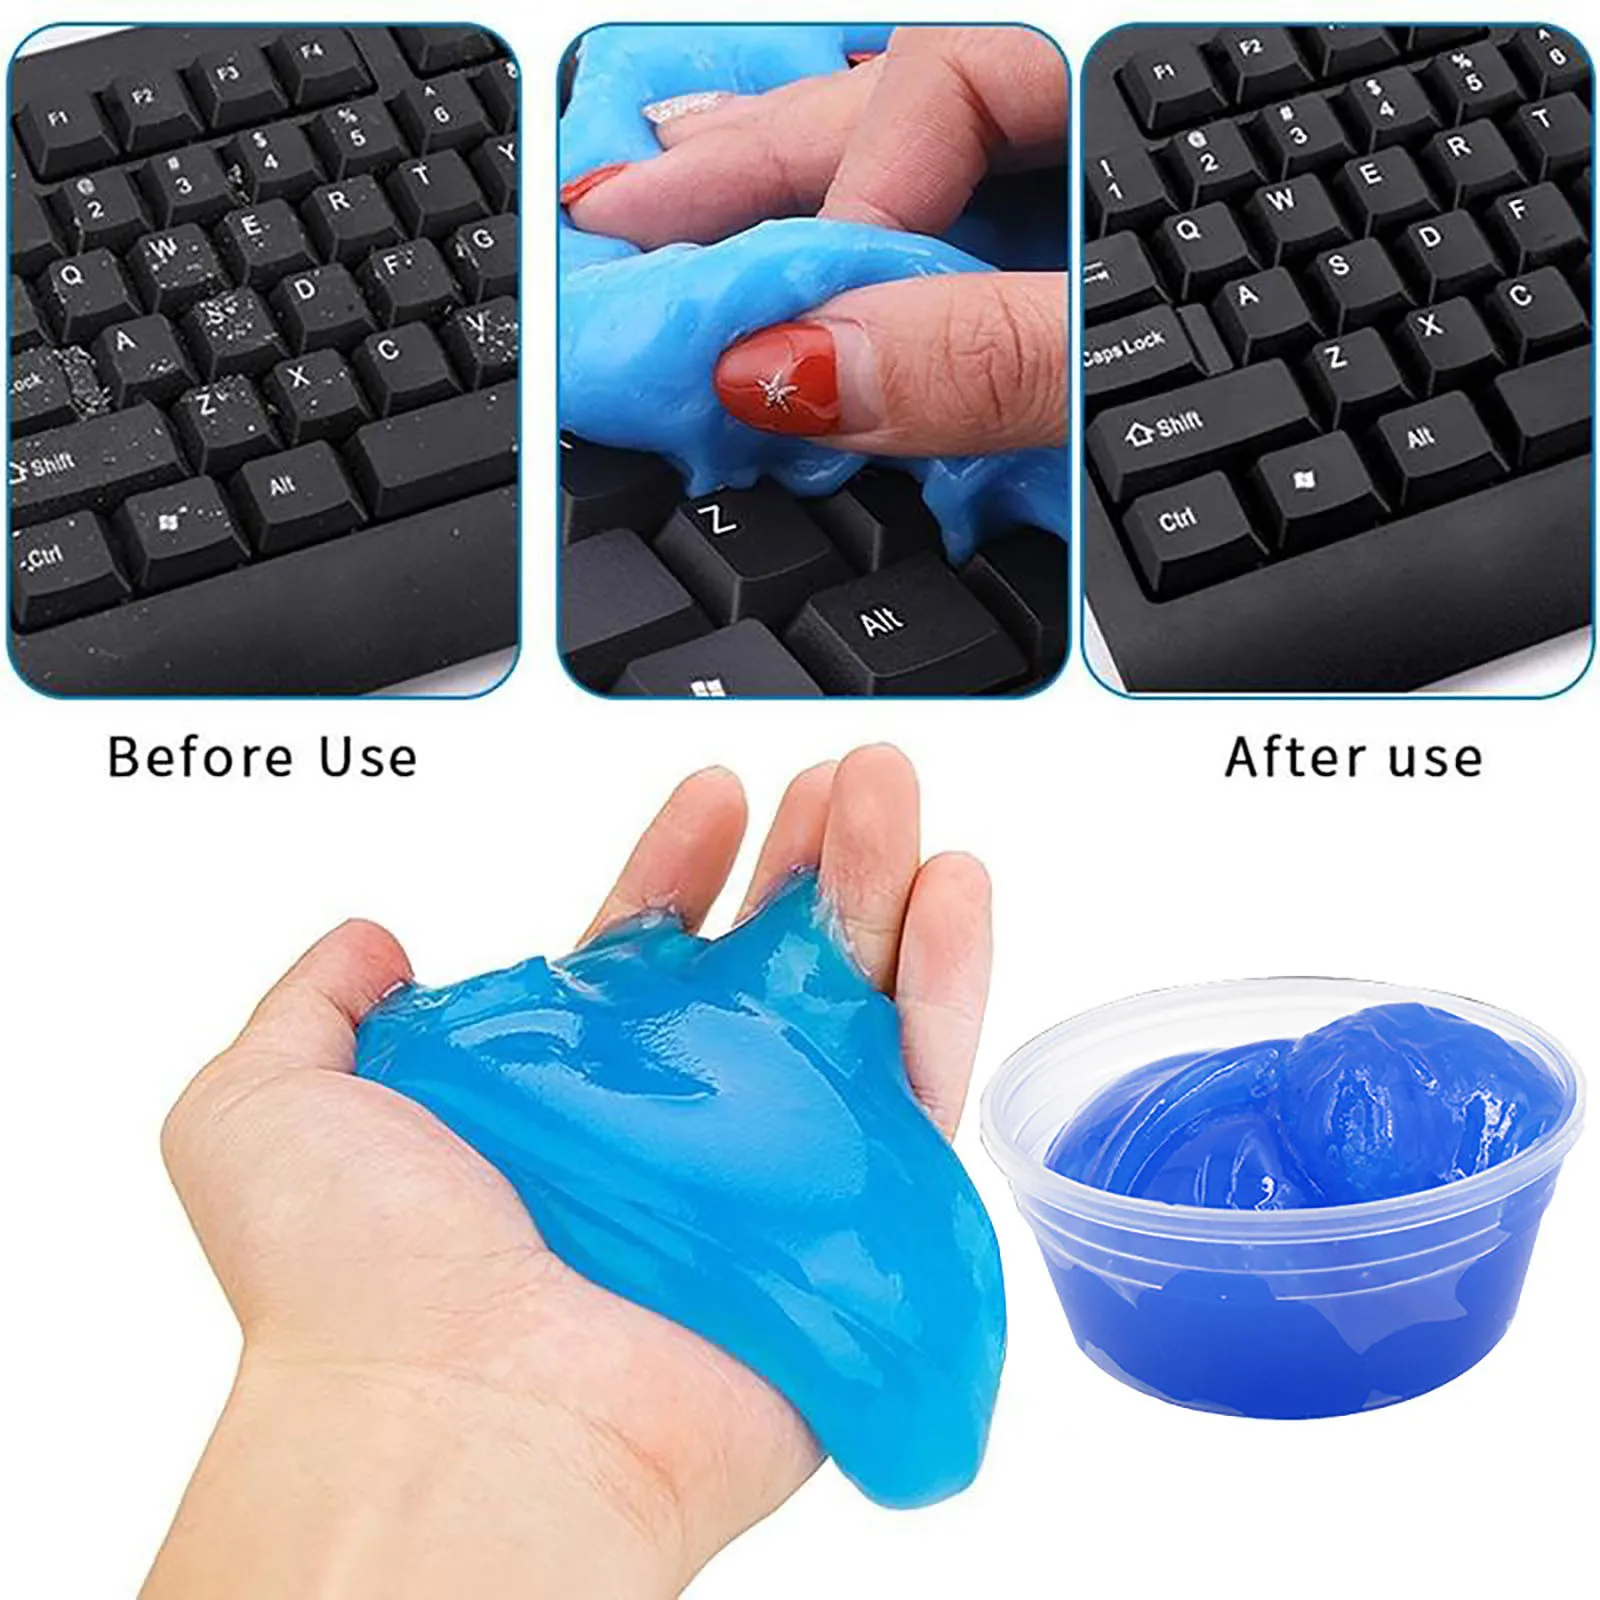 best car wax 50g Car Interior Cleaning Glue Slimes For Cleaning Air Vent Magic Dust Remover Gel Care Computer Keyboard Slime Cleaner Gel car wash water